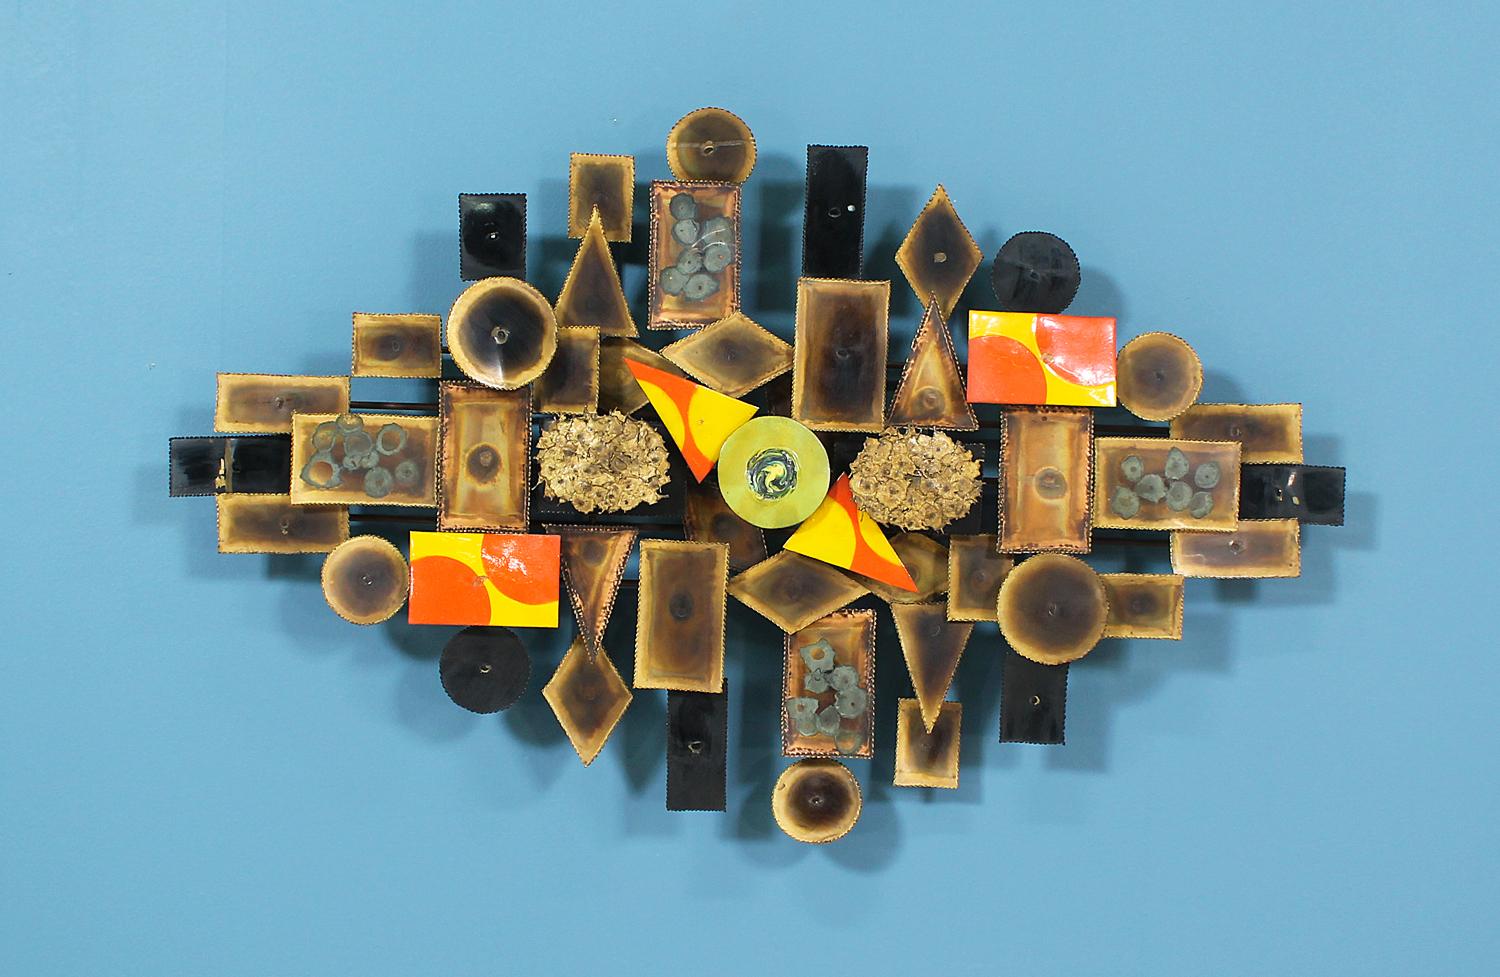 Mid-Century Brutalist wall sculpture designed and manufactured circa 1960’s. This unique wall art can be hung by both horizontal or vertical orientations. The various geometric shapes are made of bronze and copper and connected by a fine brass